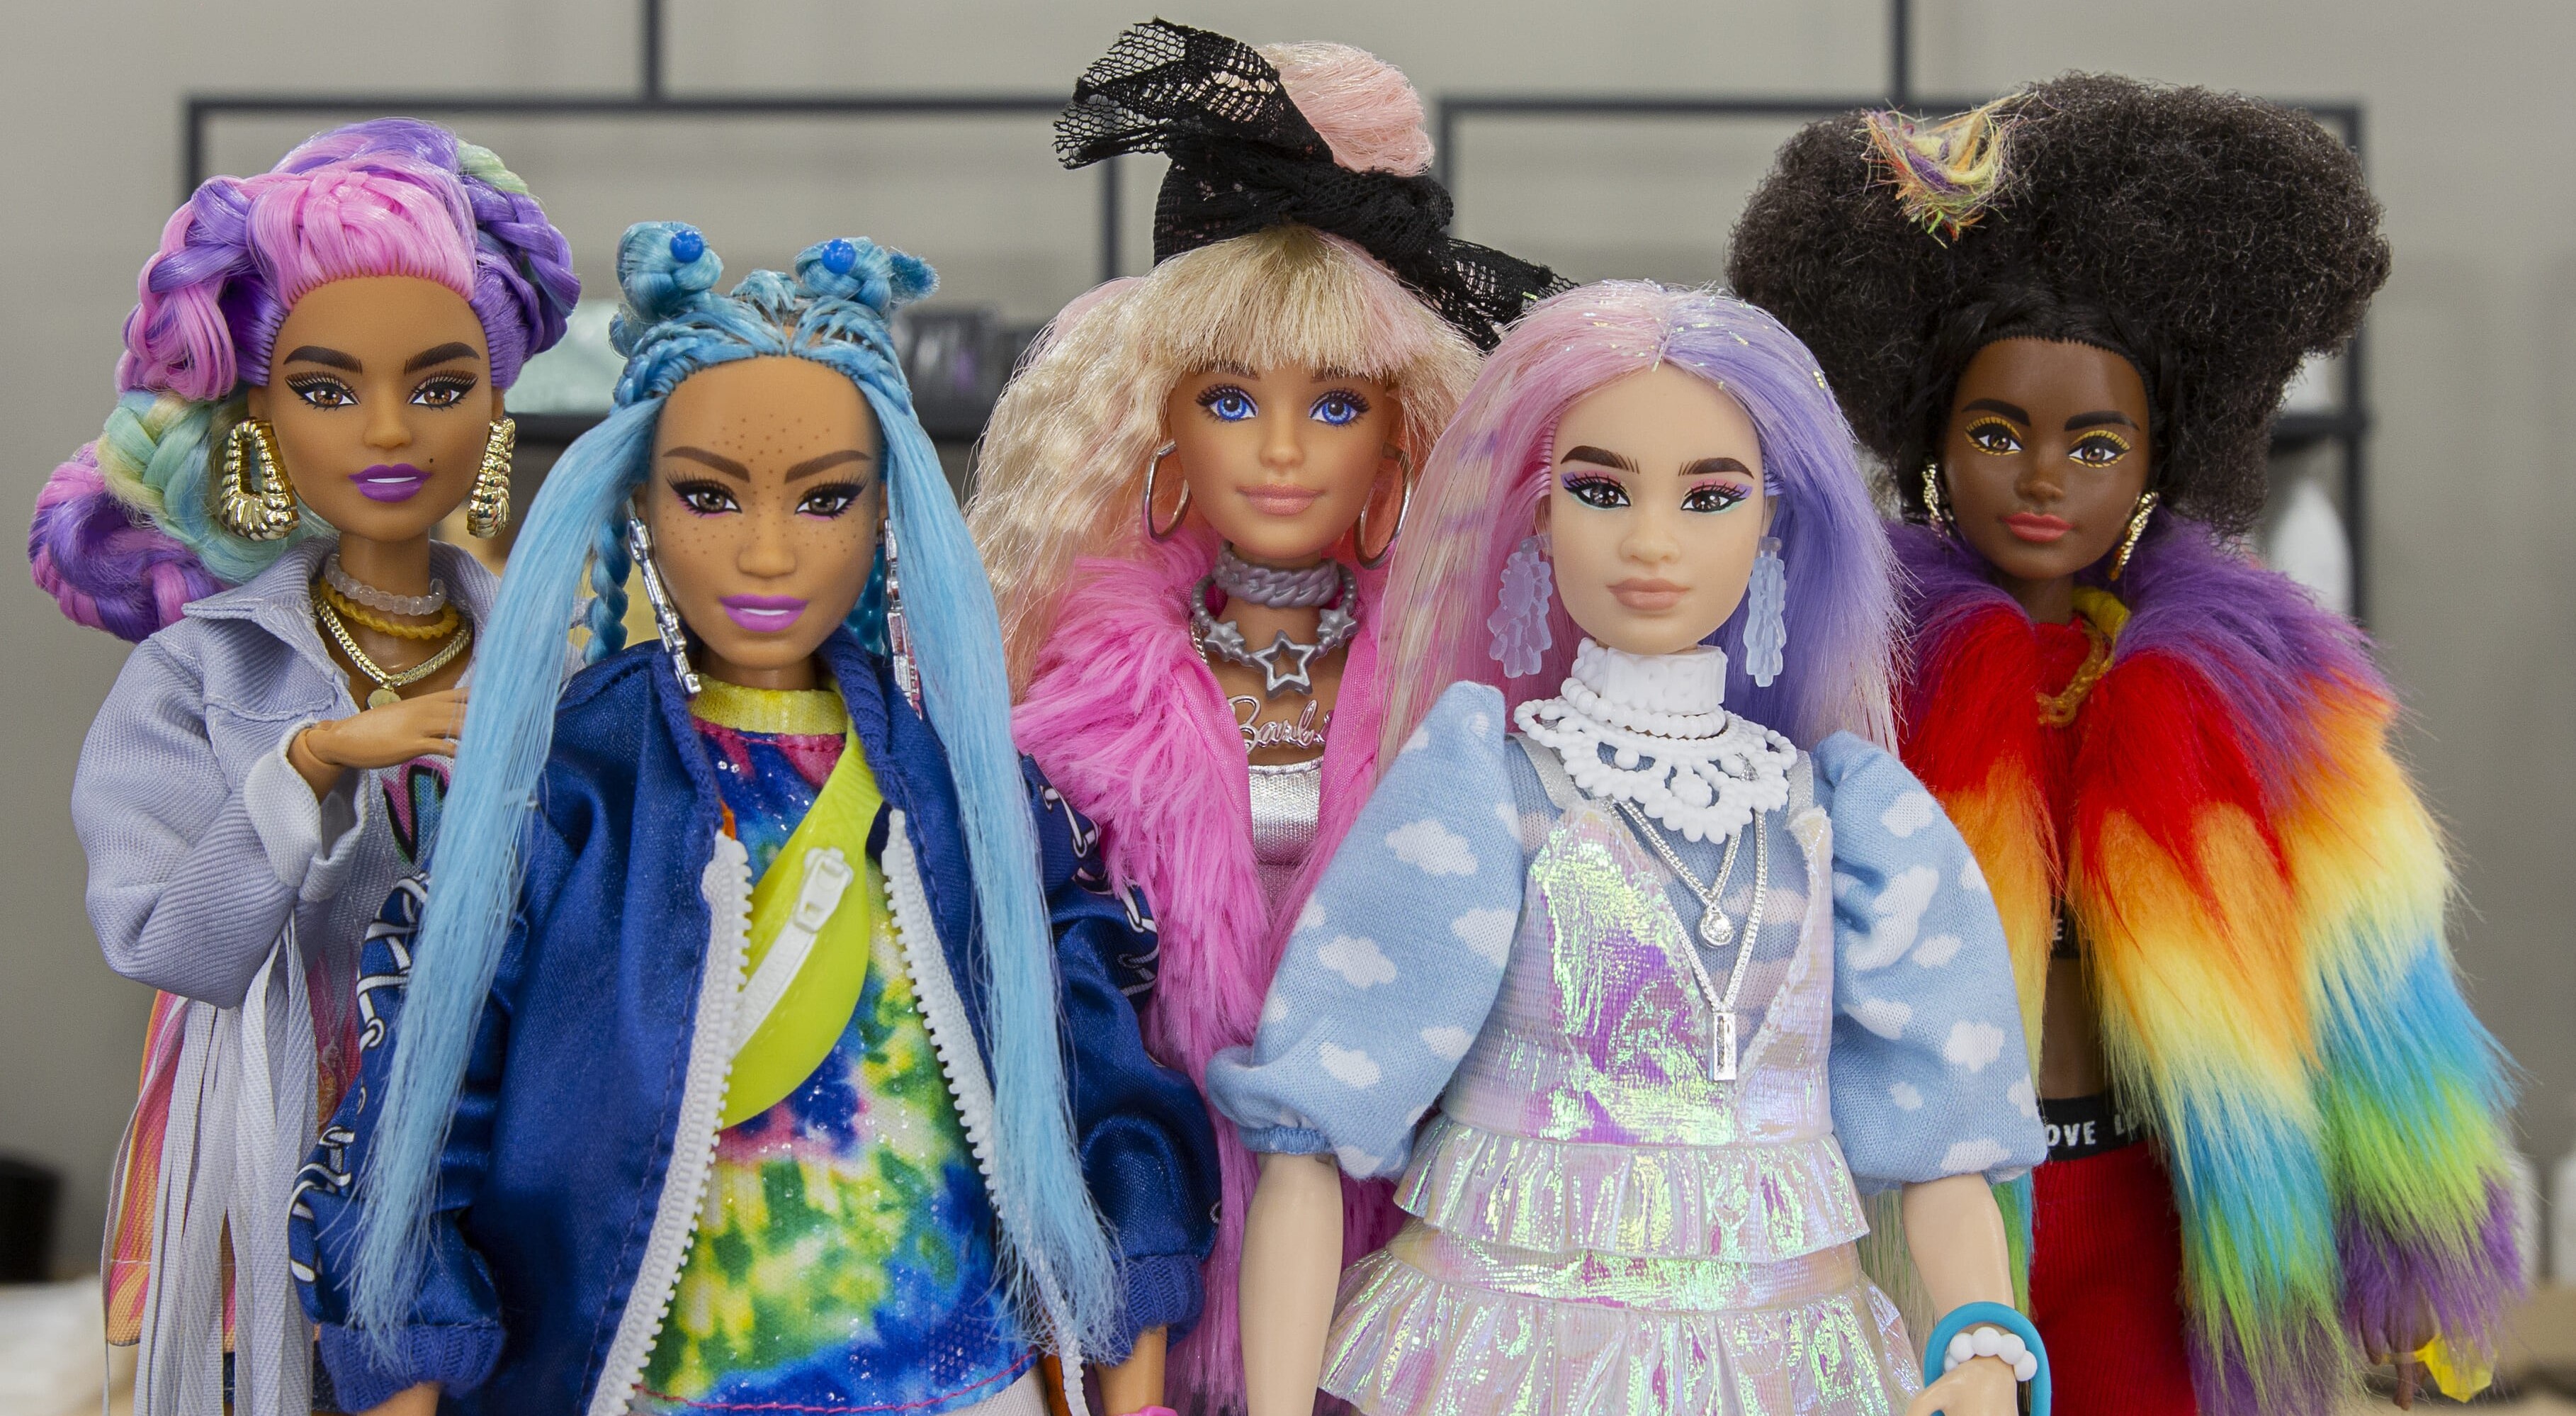 Barbie brand collaborations and merchandise for the Barbie Girl aesthetic